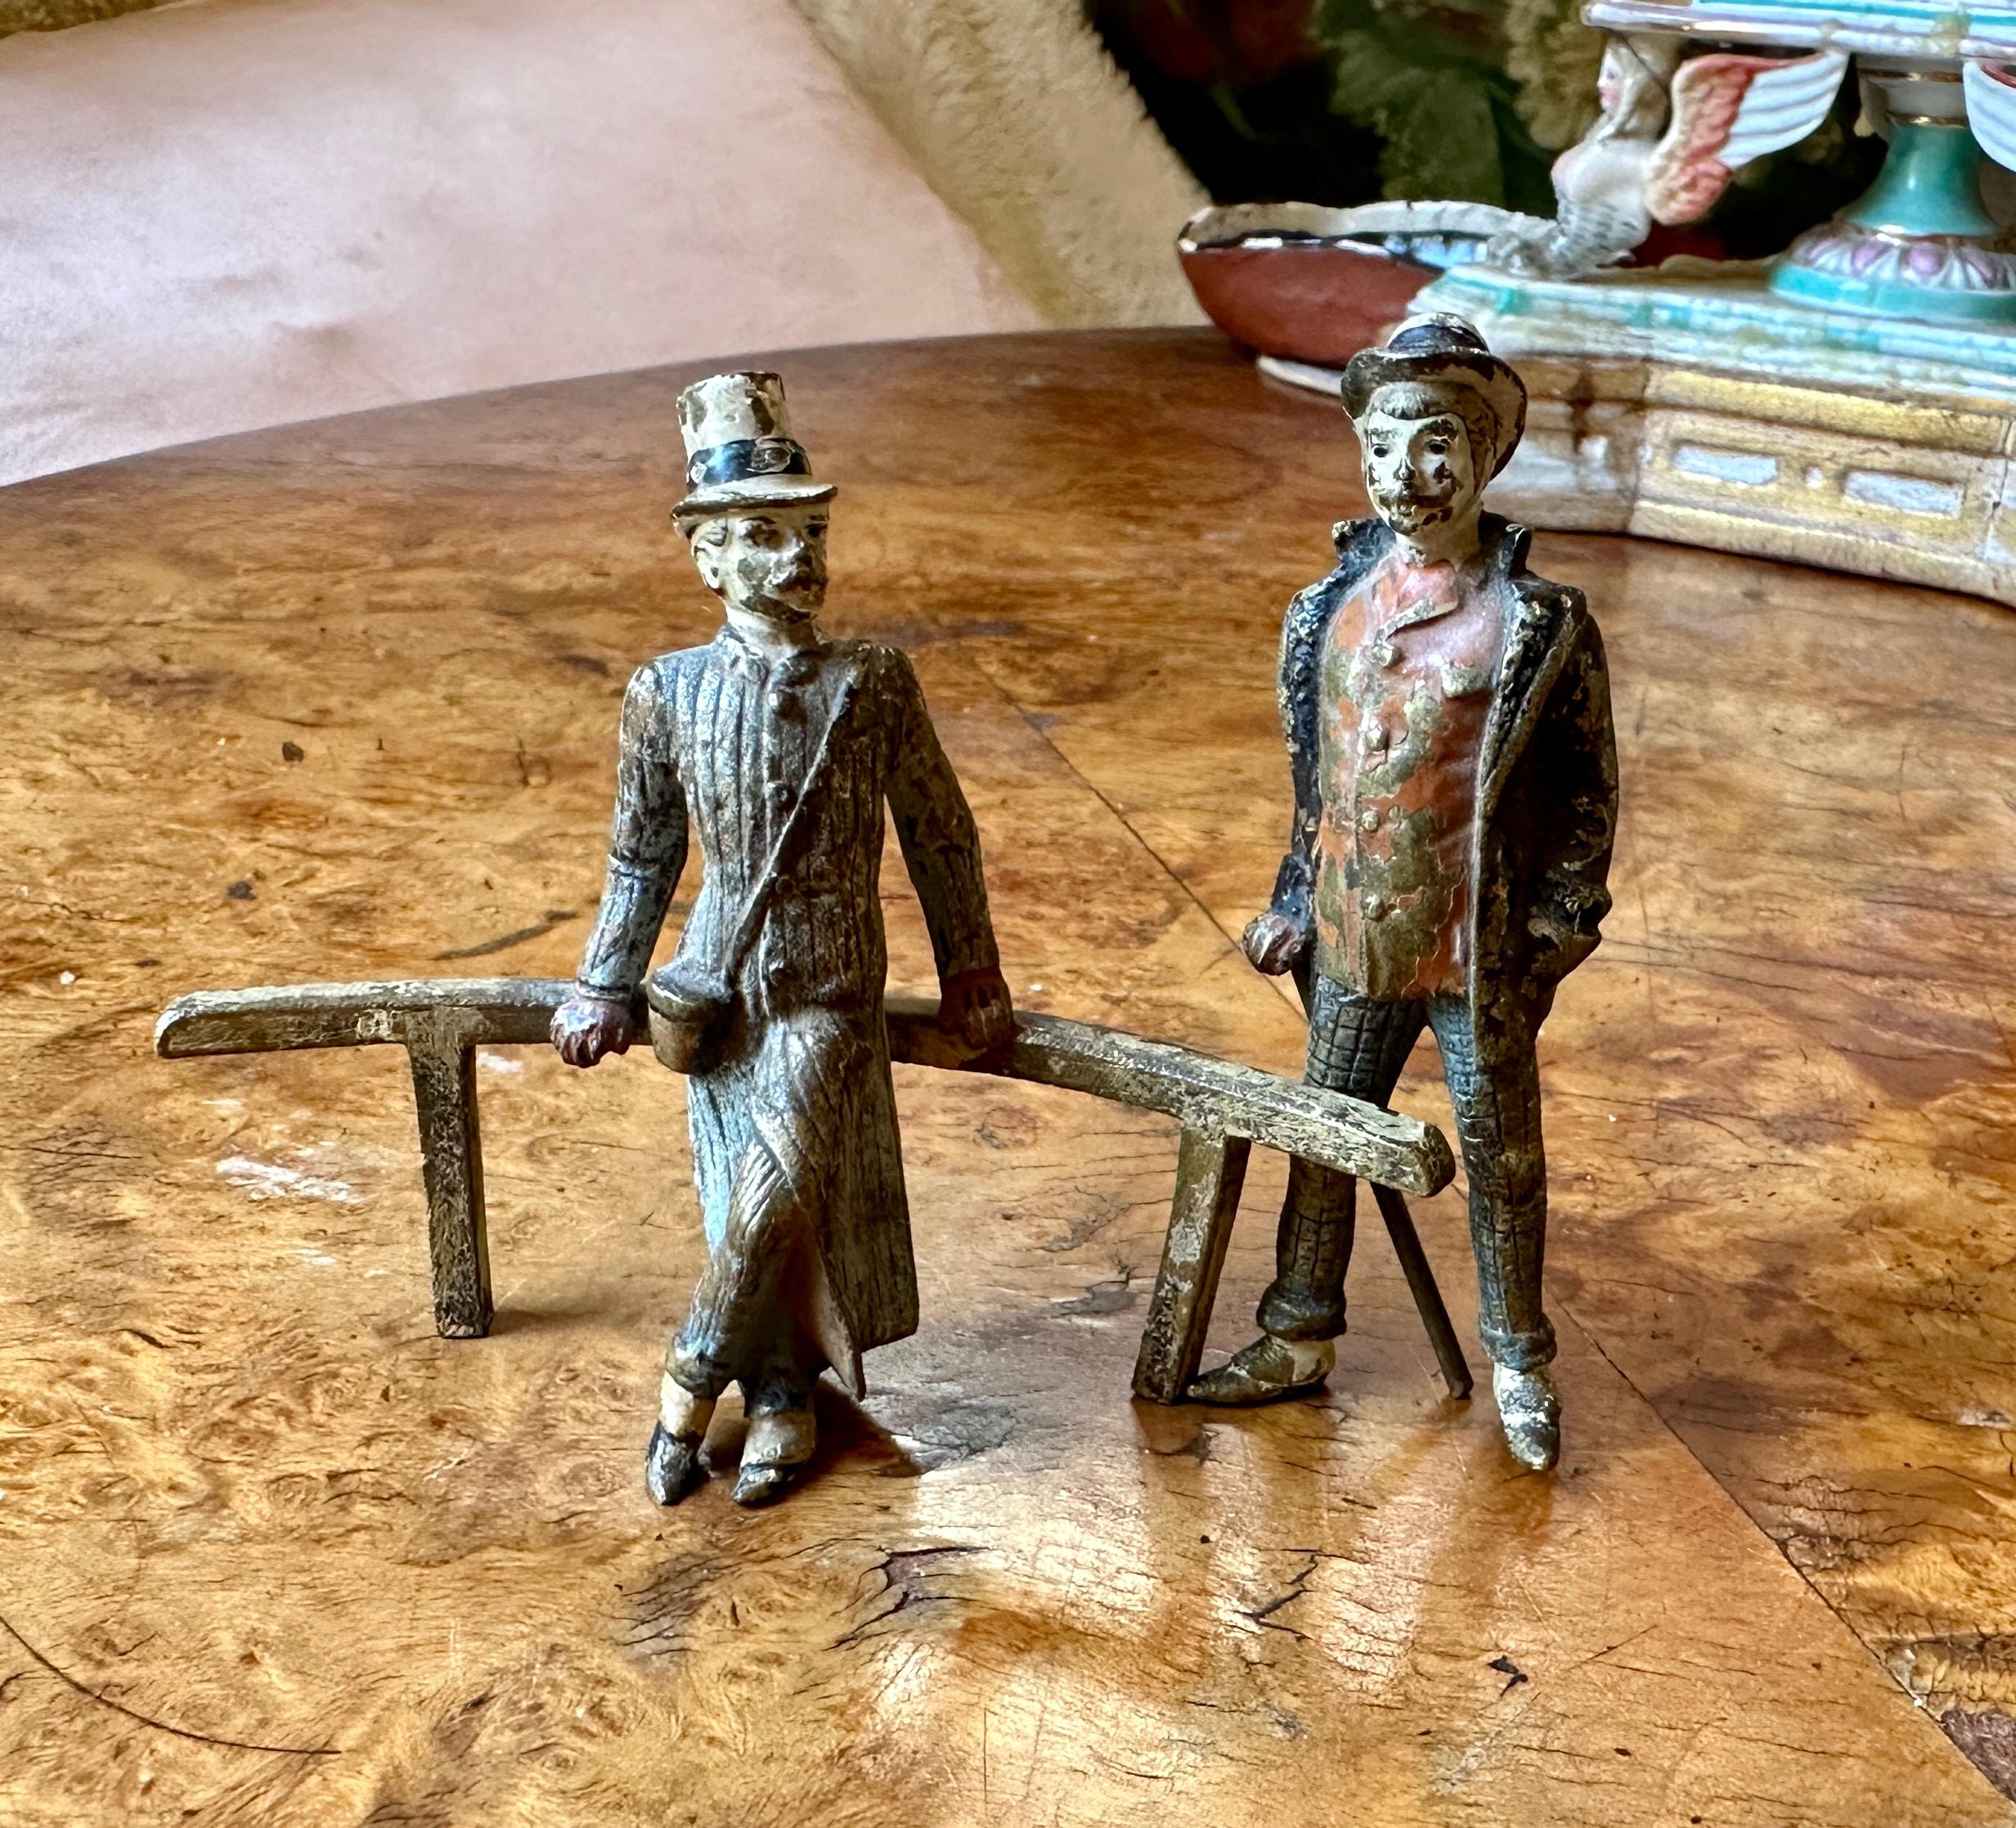 THIS IS A SUPERB AND VERY RARE TRIO OF THREE VICTORIAN - EDWARDIAN GENTLEMEN.  THE BRONZE SCULPTURES ARE CHARMING ANTIQUE AUSTRIAN VIENNA BRONZE.  THE THREE MEN LOUNGE AS IF IN A PARK, ONE LEANING ON A RAILING.  THEIR FACES, CLOTHES, POSES AND